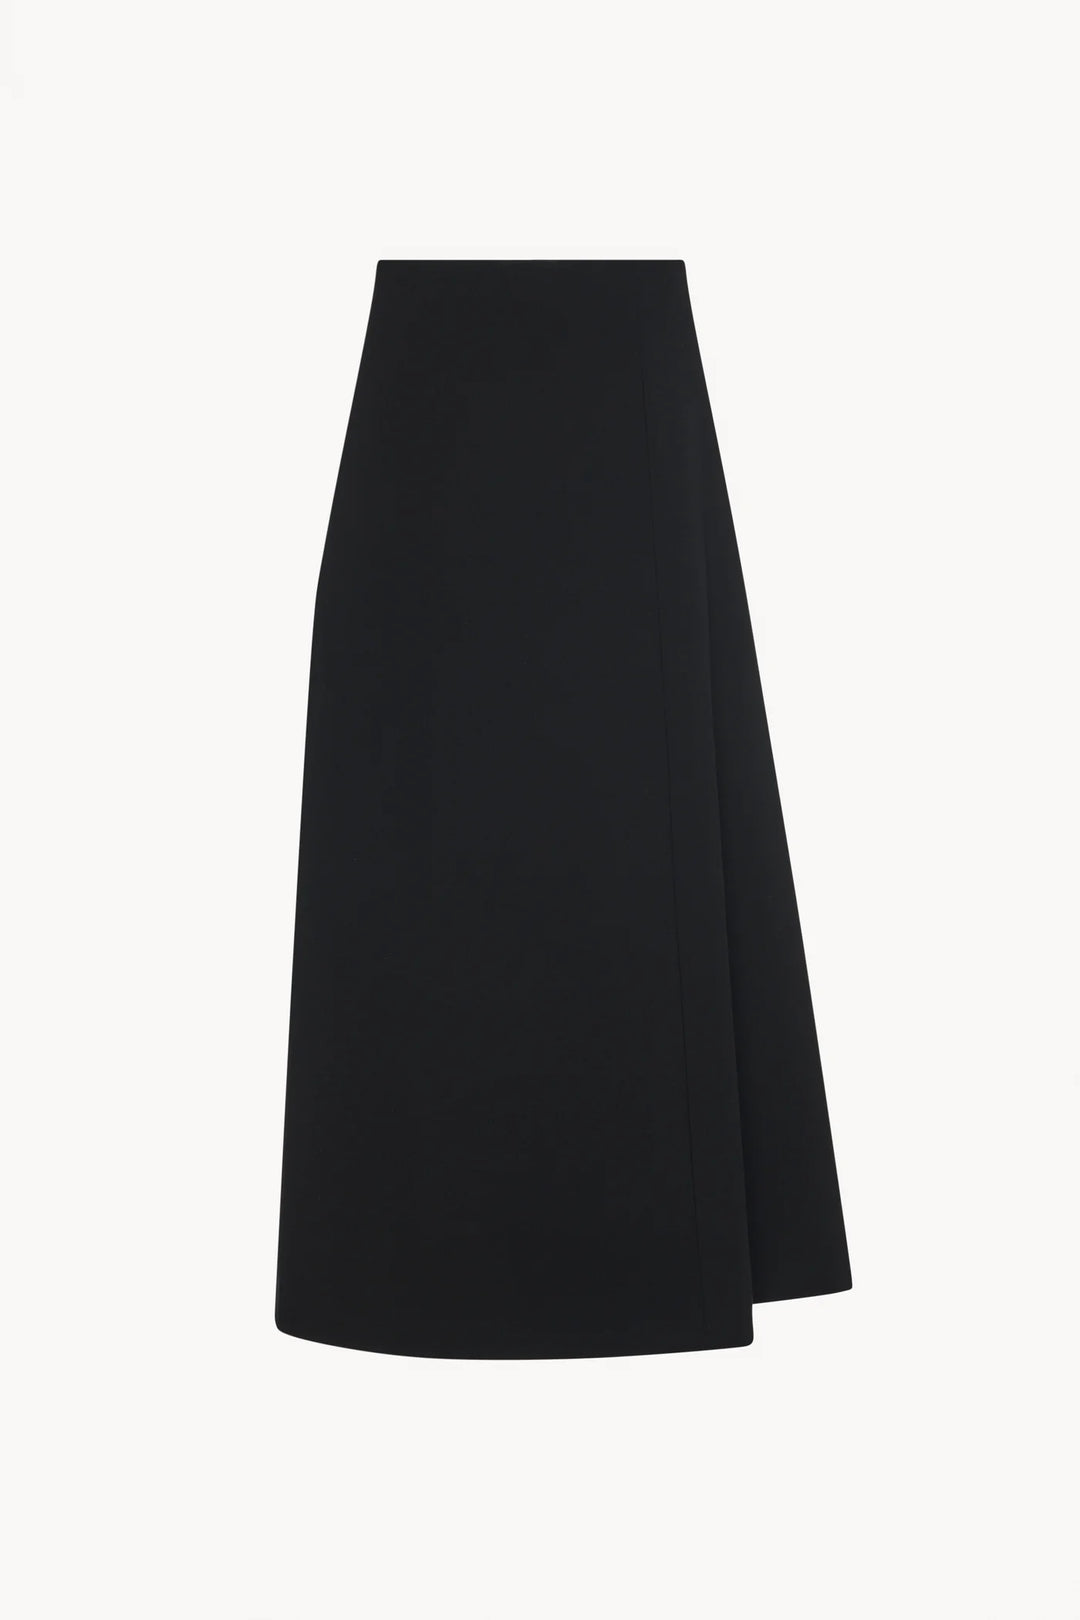 The Row Flores Skirt